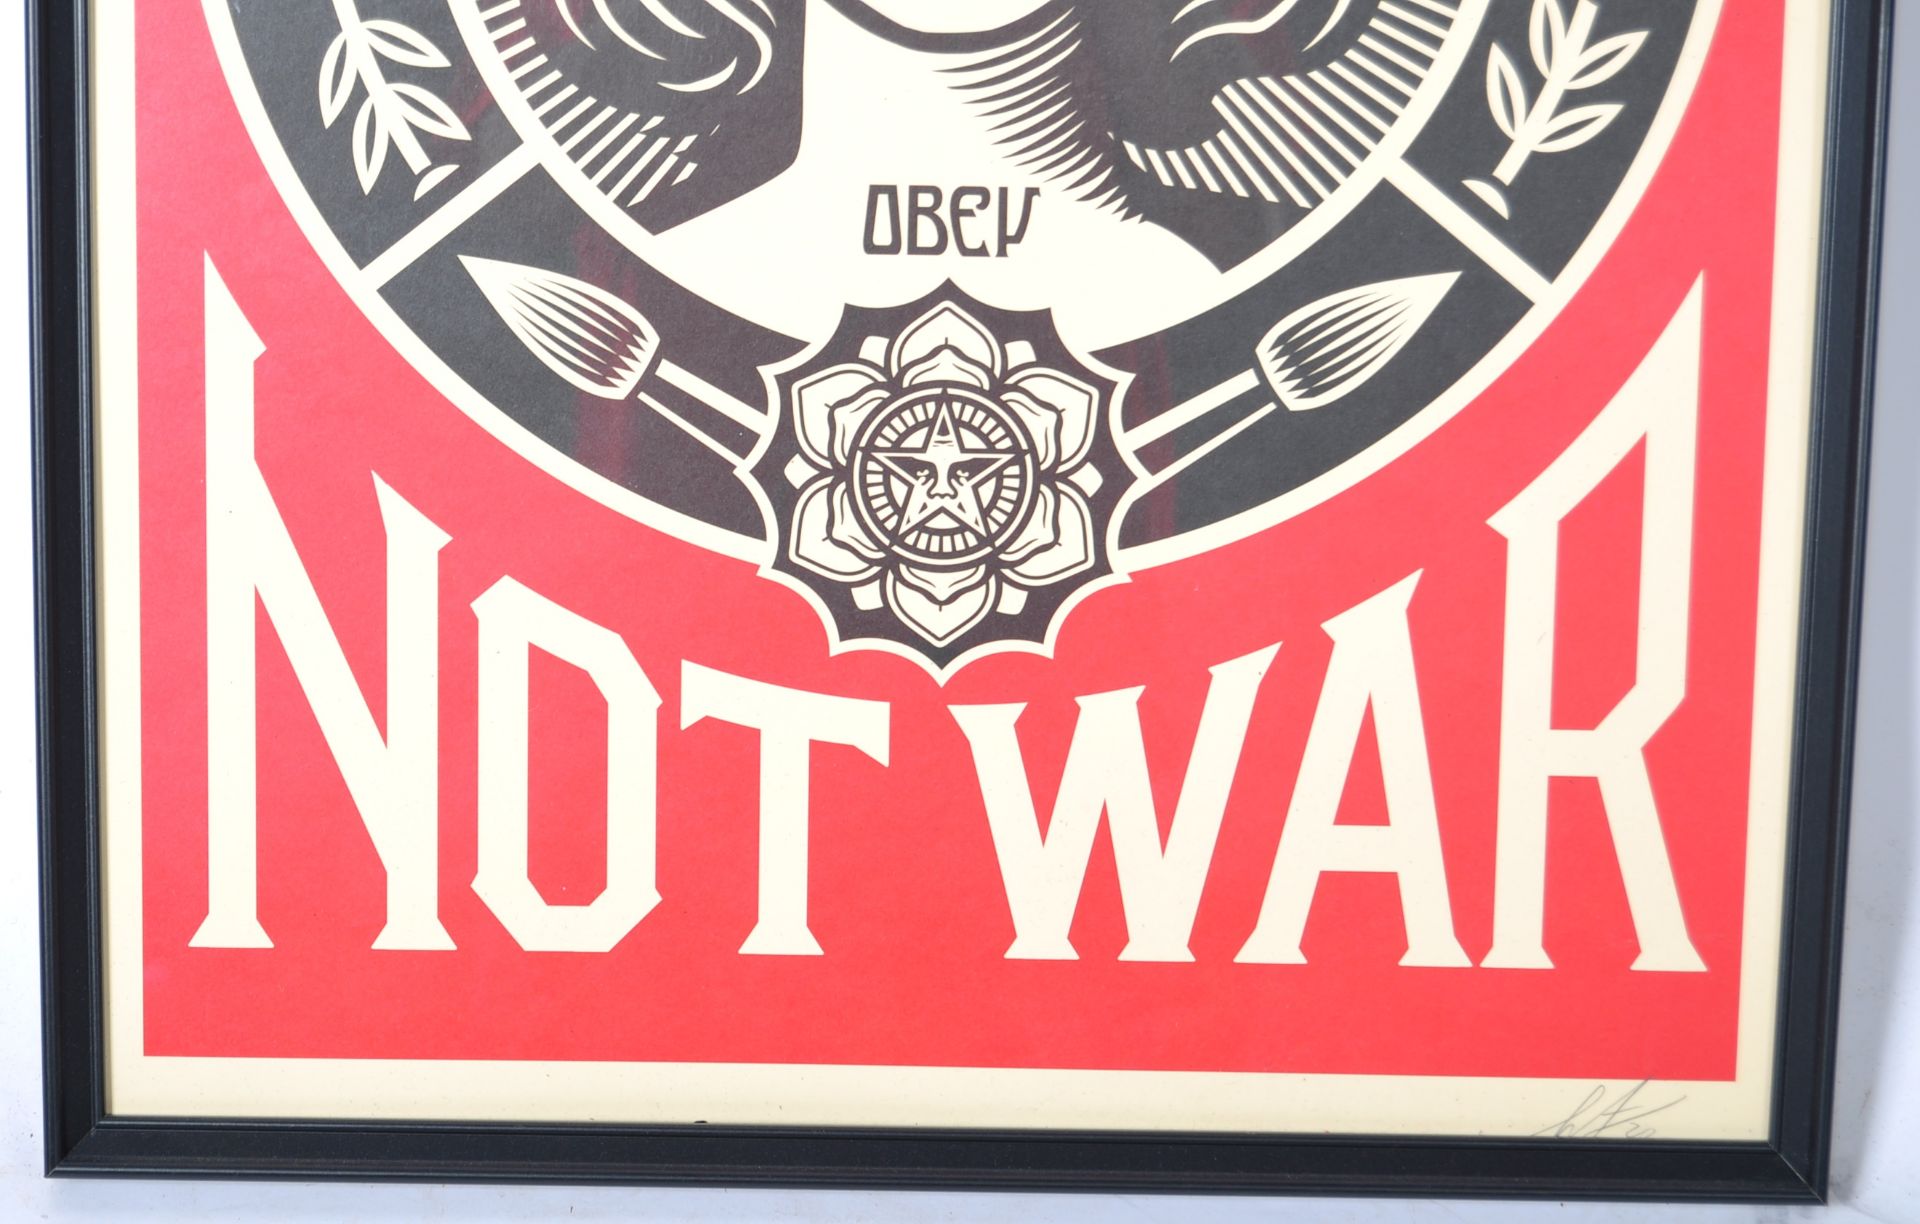 OBEY CONTEMPORARY ART NOUVEAU STYLE MAKE ART NOT WAR POSTER - Image 4 of 5